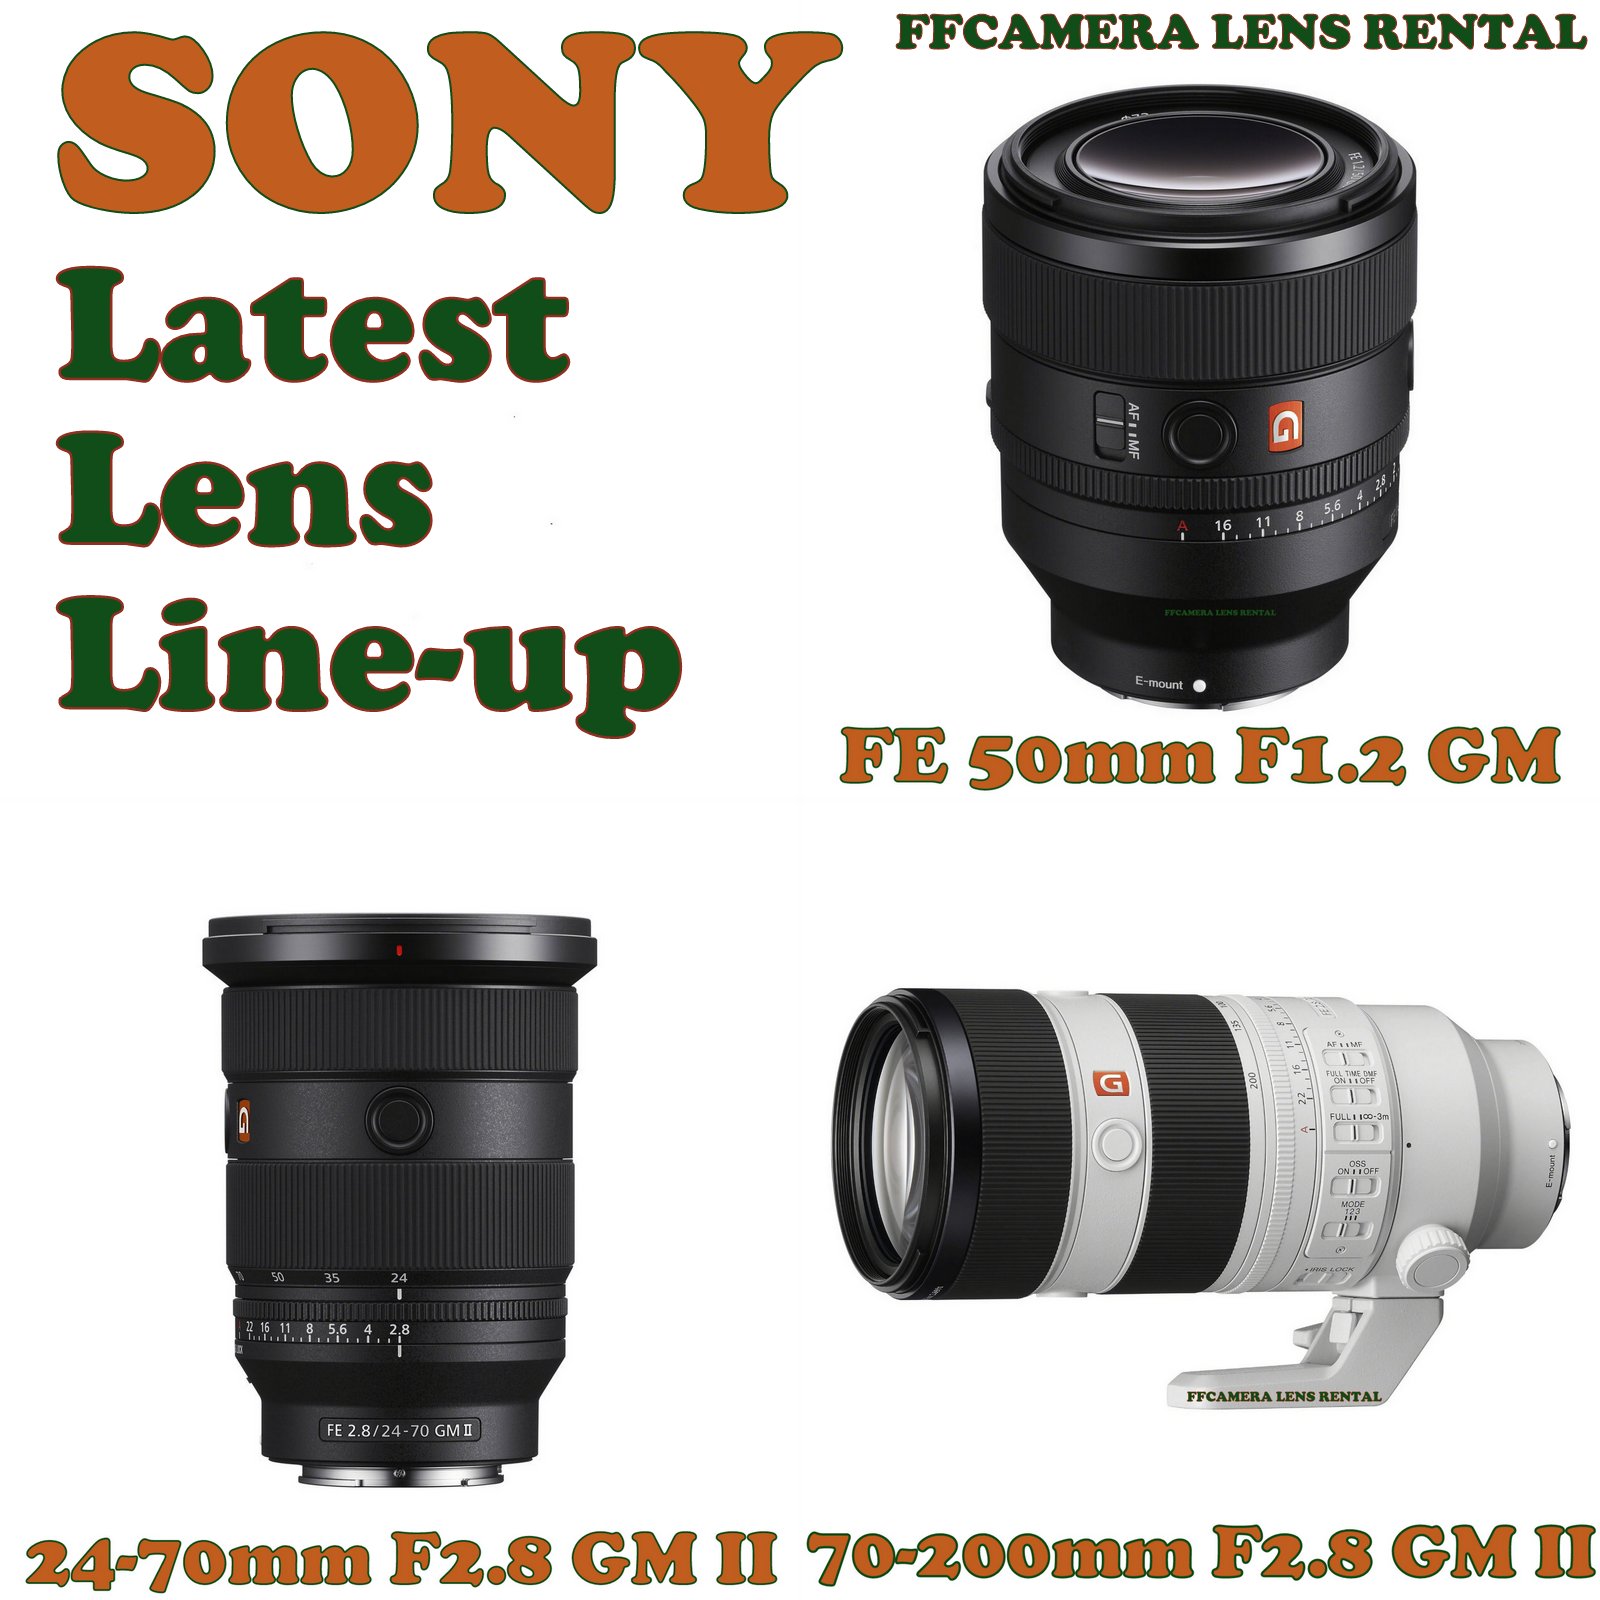 New addition to our Sony lens line-up. FE 50mm F1.2 GM FE 24-70mm F2.8 GM II FE 70-200mm F2.8 GM OSS II